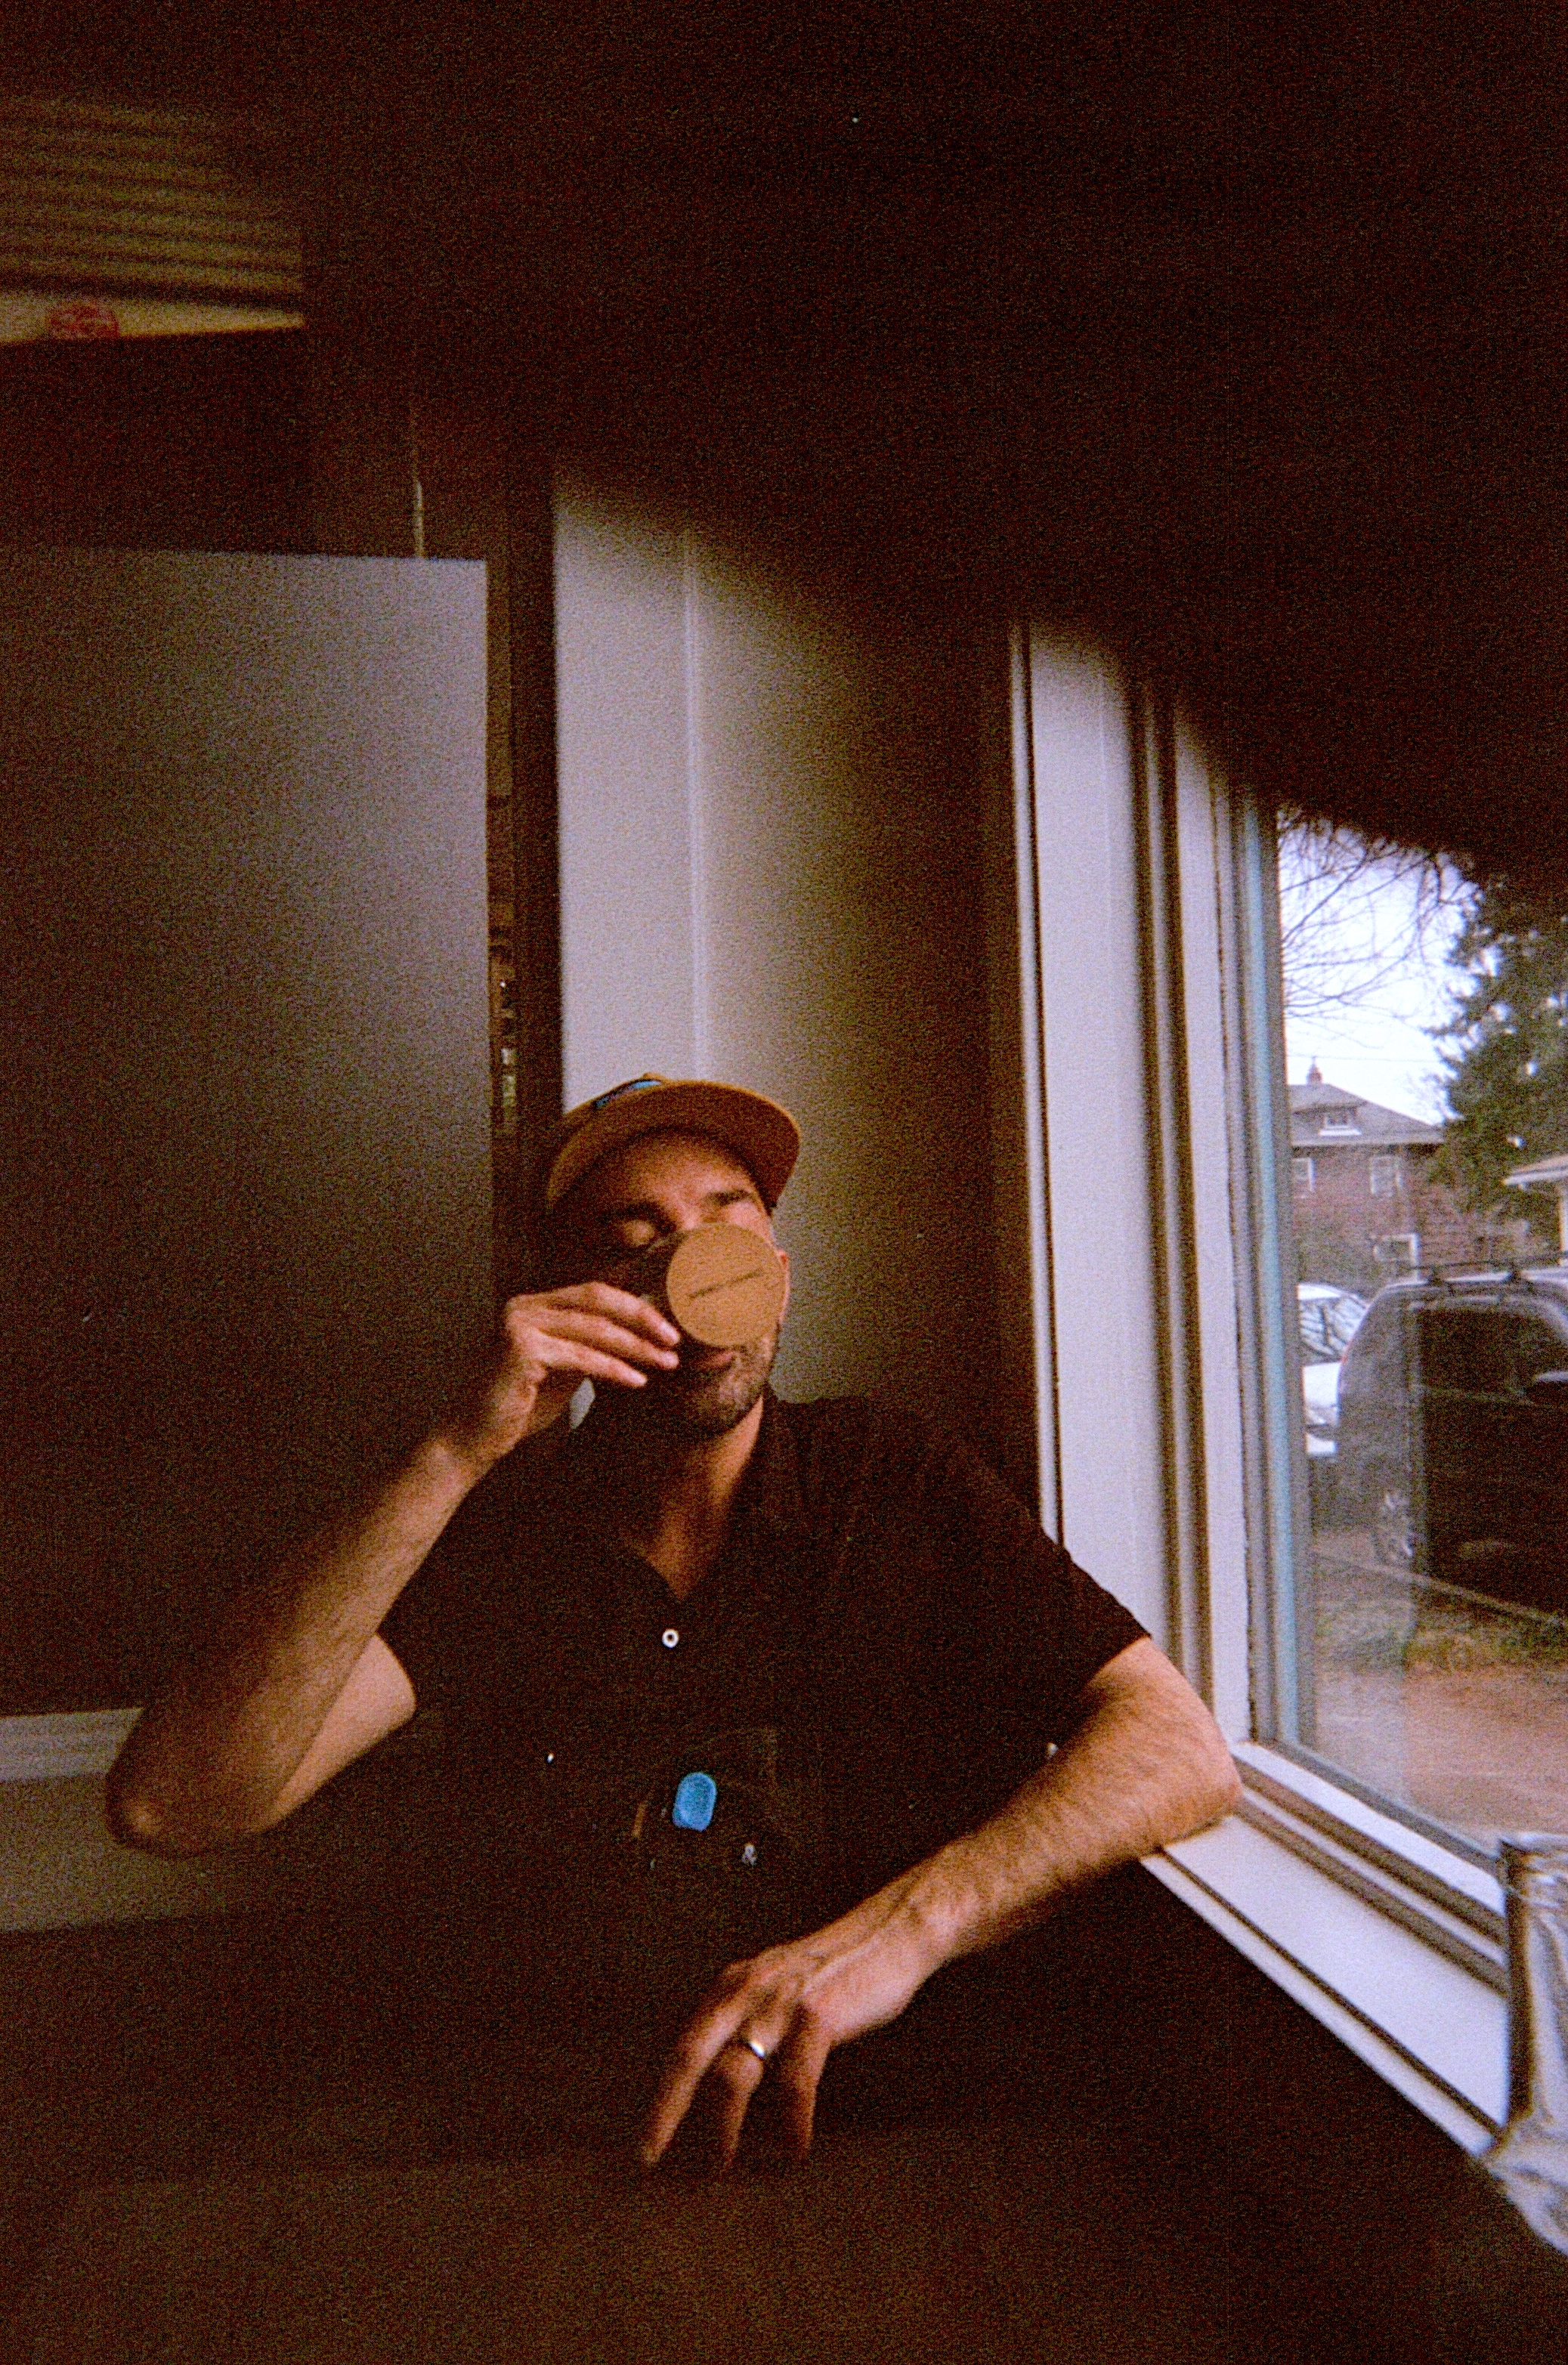 A man sits in the window of Jacqueline drinking a cup of coffee.